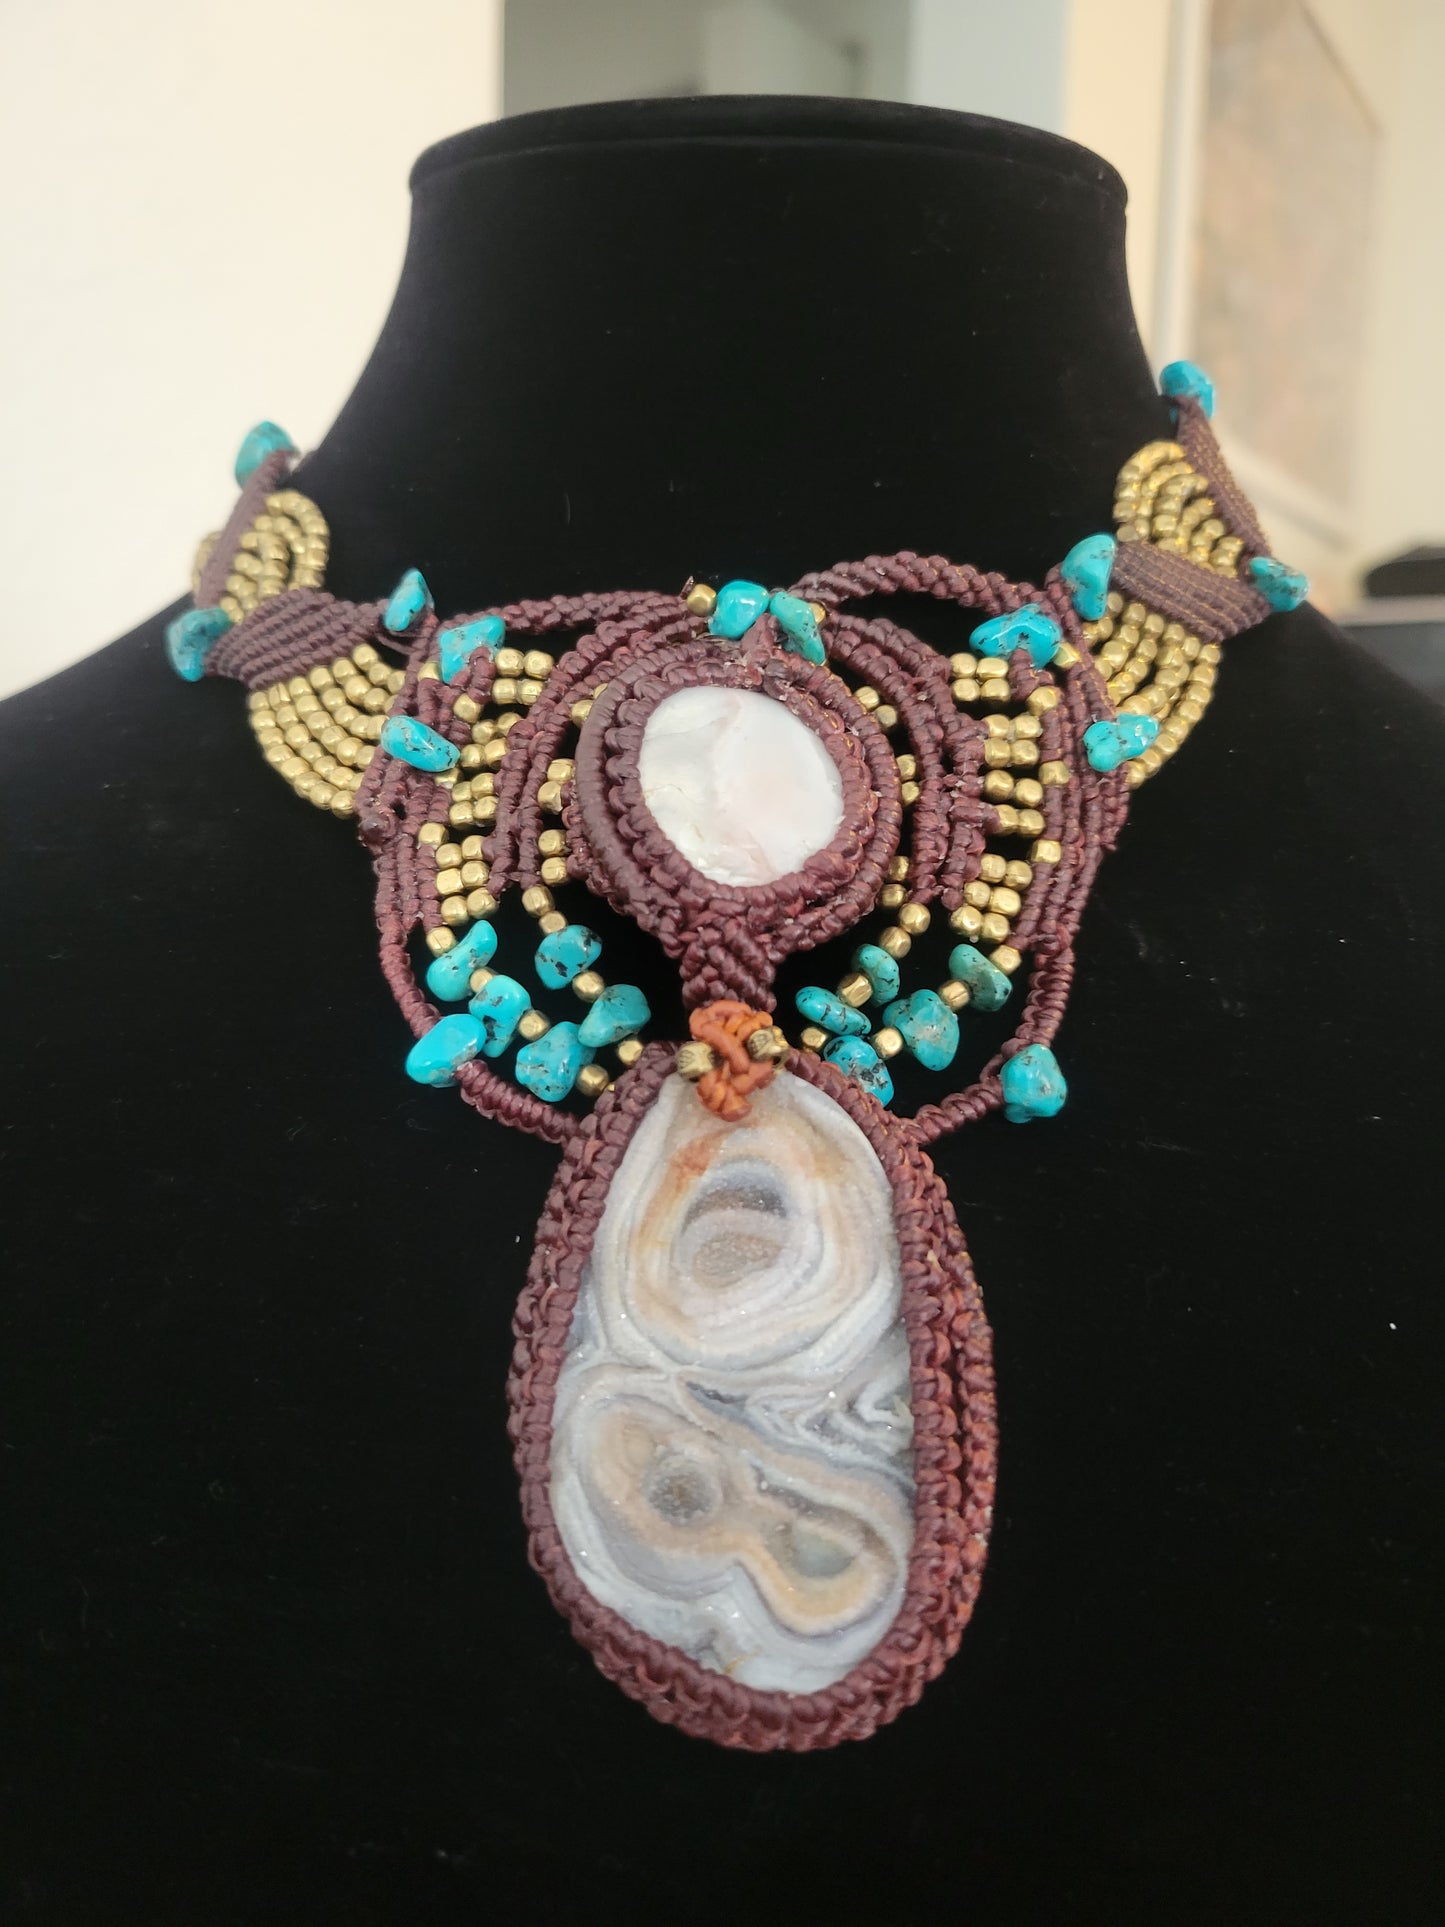 Ocean Agate & Druzy Micromacrame Choker - Unique Artisan Crafted